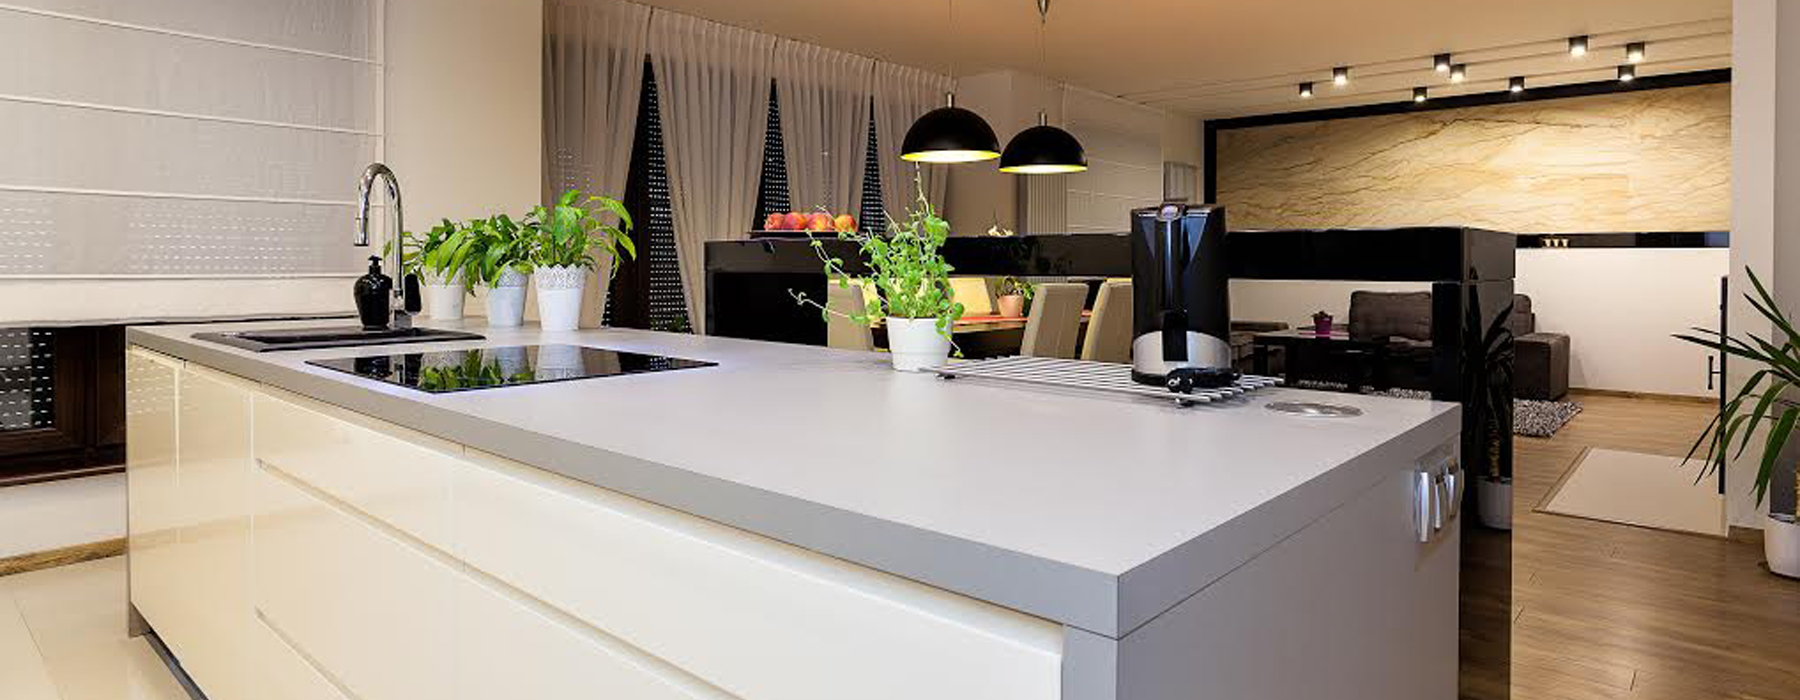 Why Granite Kitchen Worktops Are The Best Option For Your Kitchen?